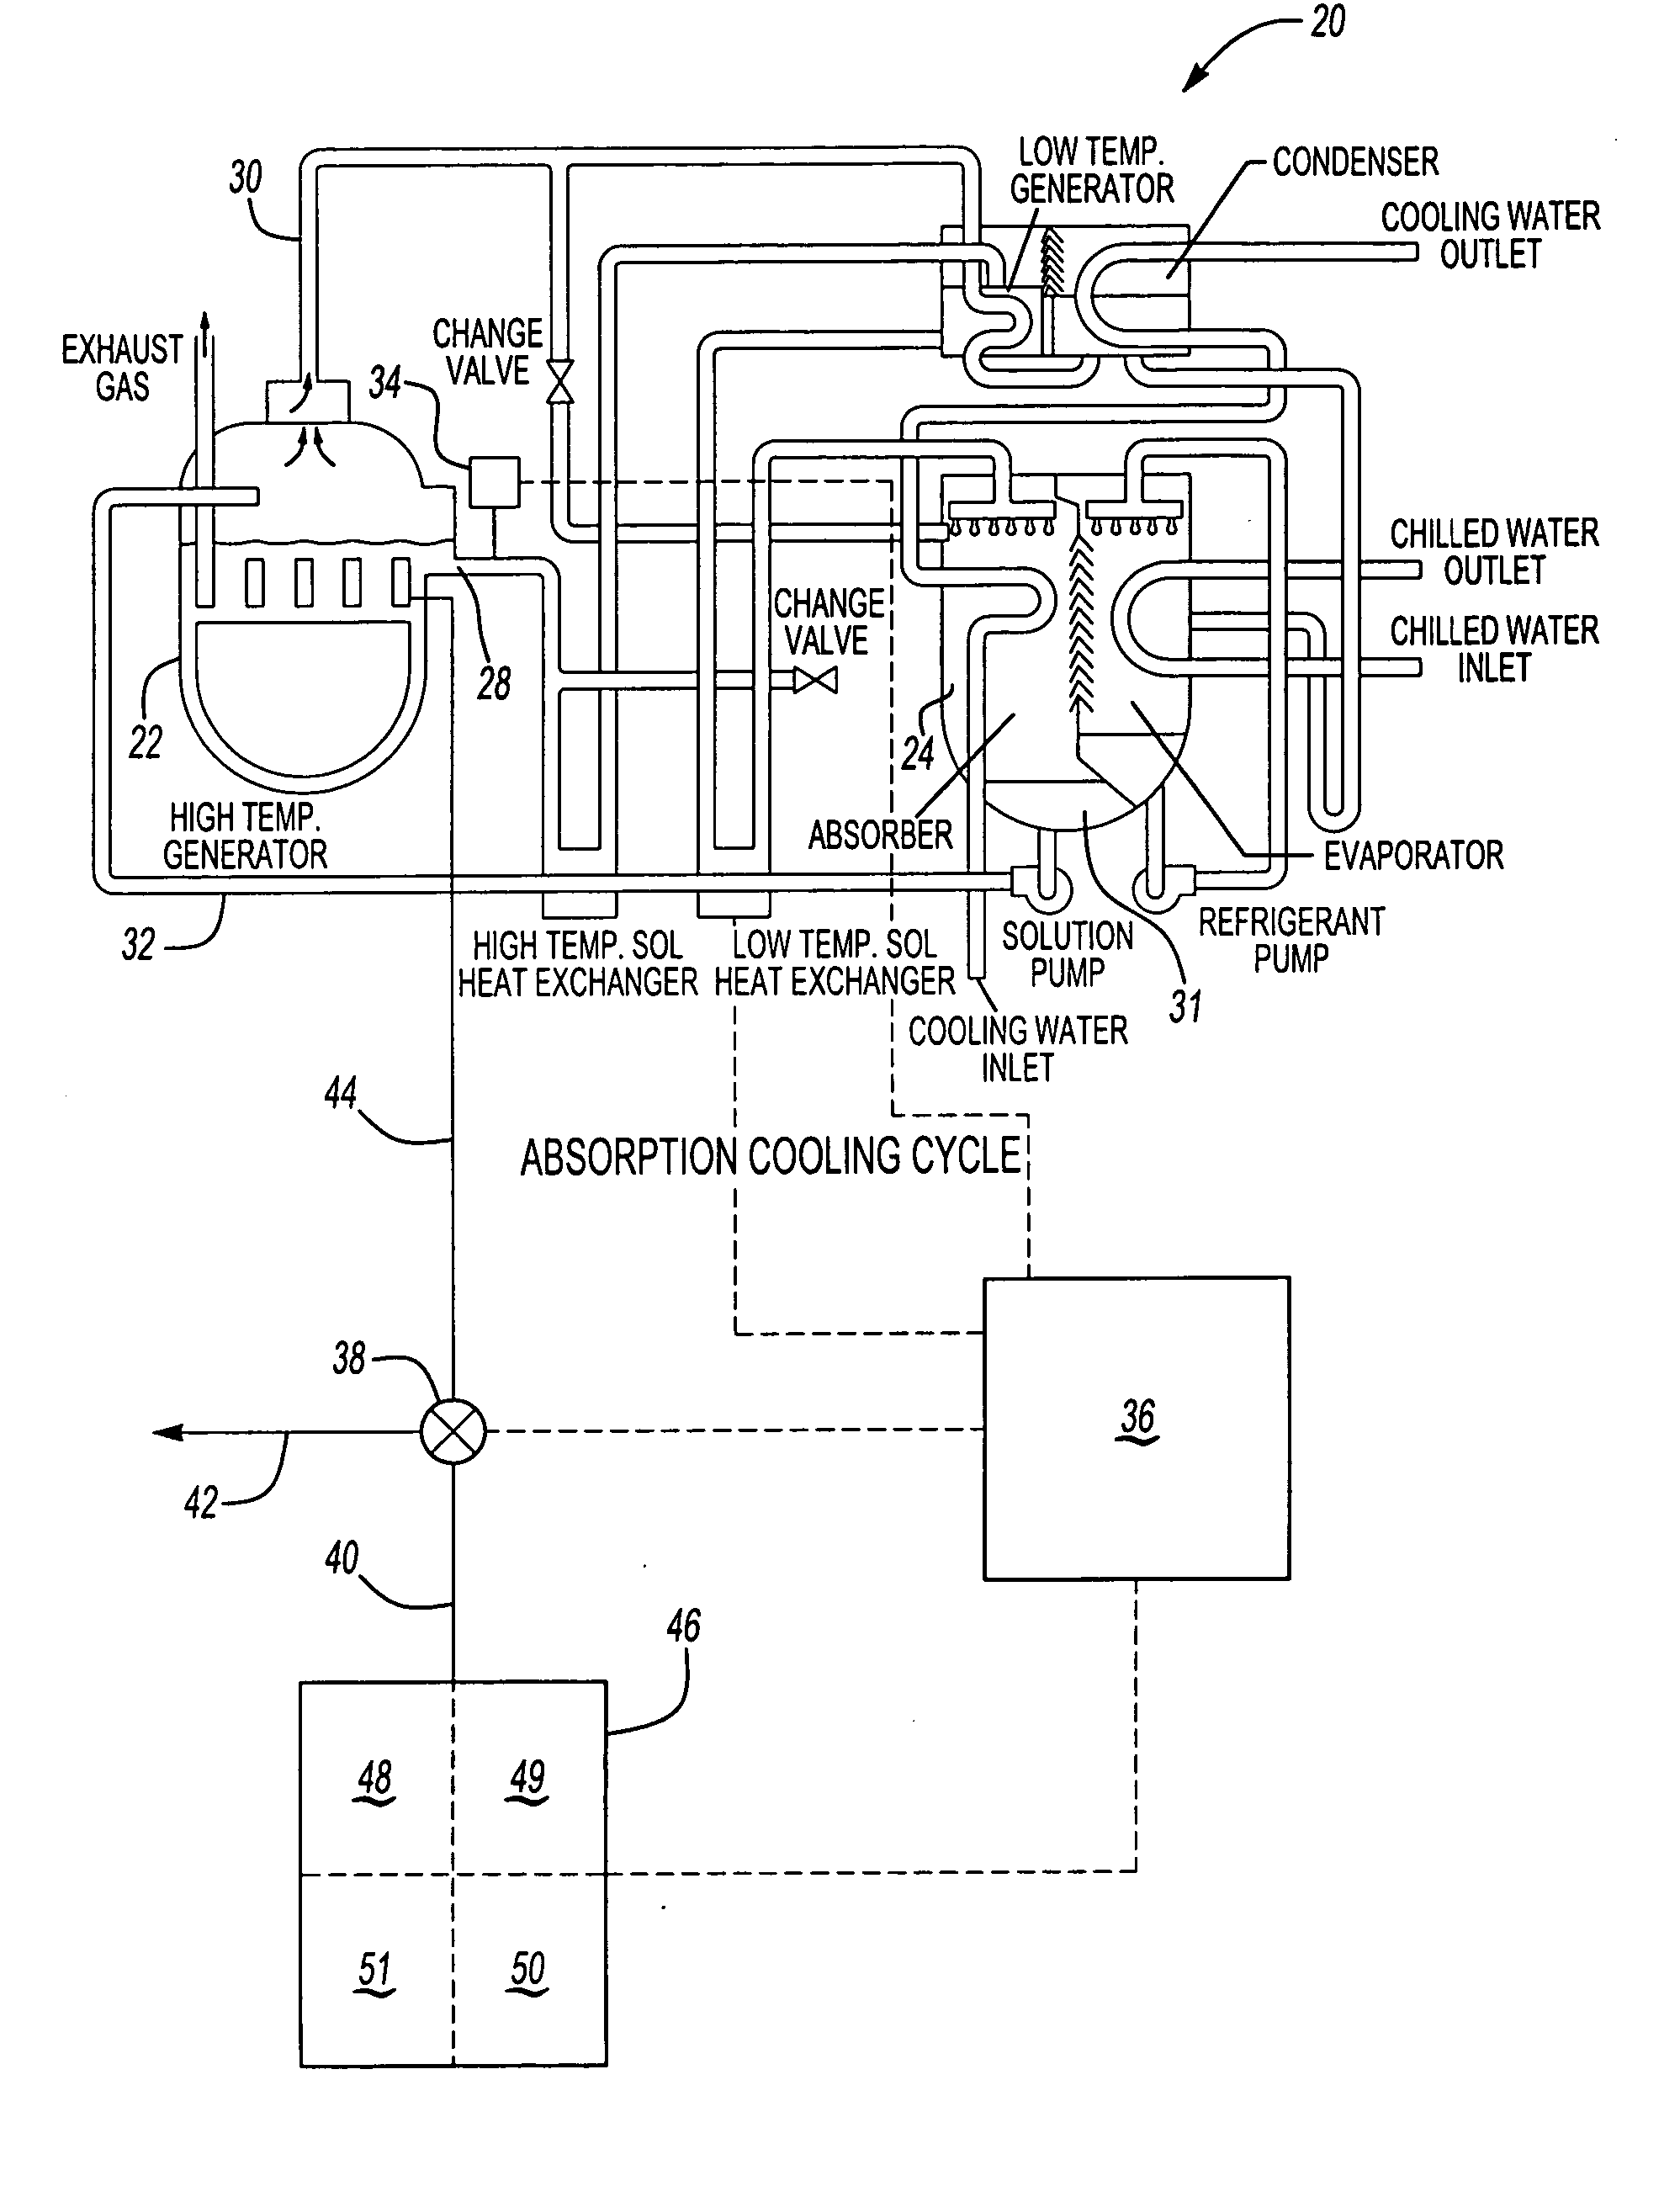 Efficient control for smoothly and rapidly starting up an absorption solution system